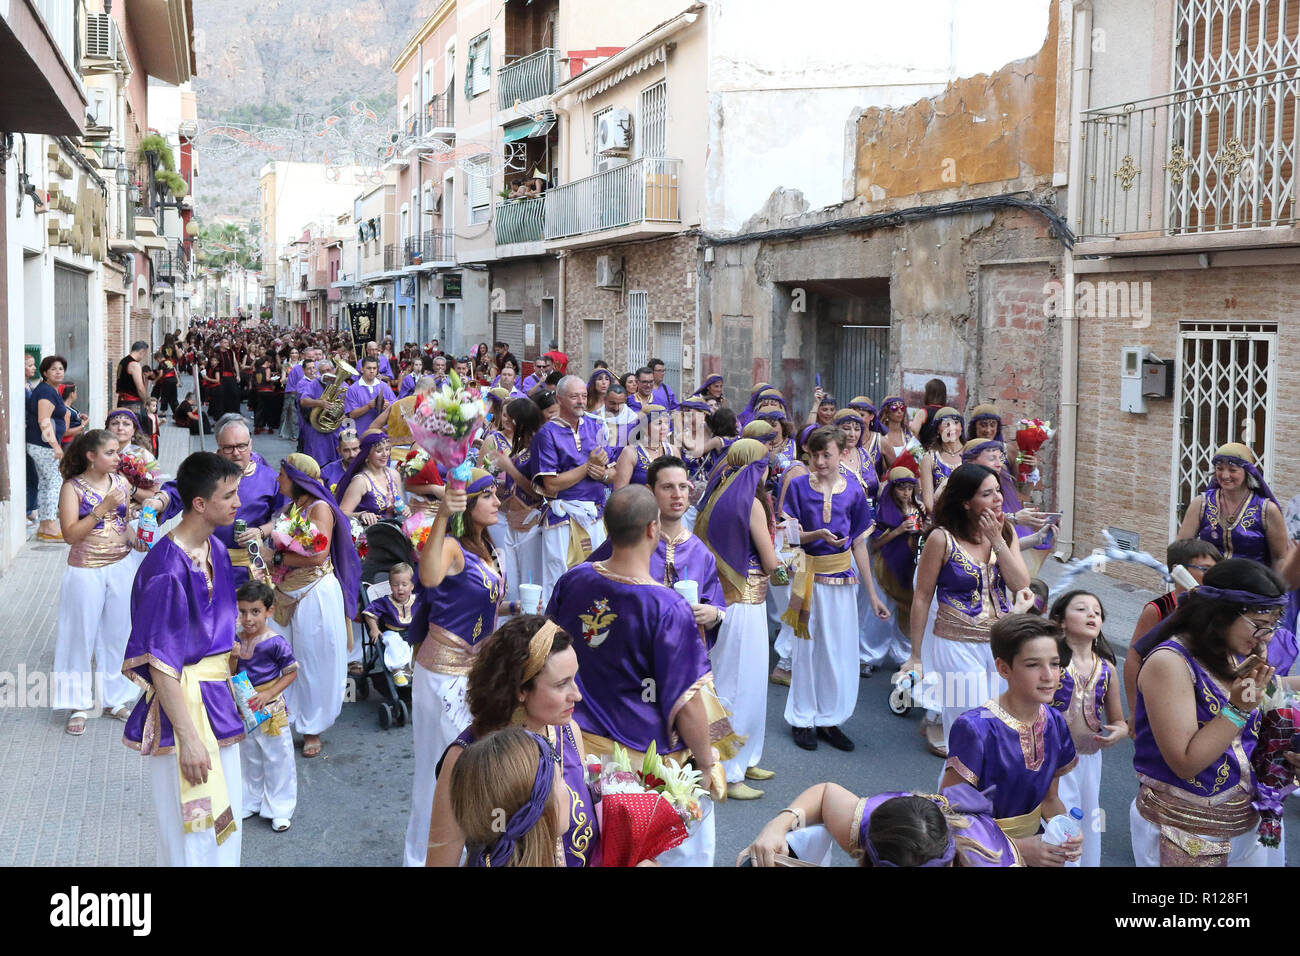 The Moros Almohabenos company on a street parade during the Moors and Christians (Moros y Cristianos) historical reenactment in Orihuela, Spain Stock Photo